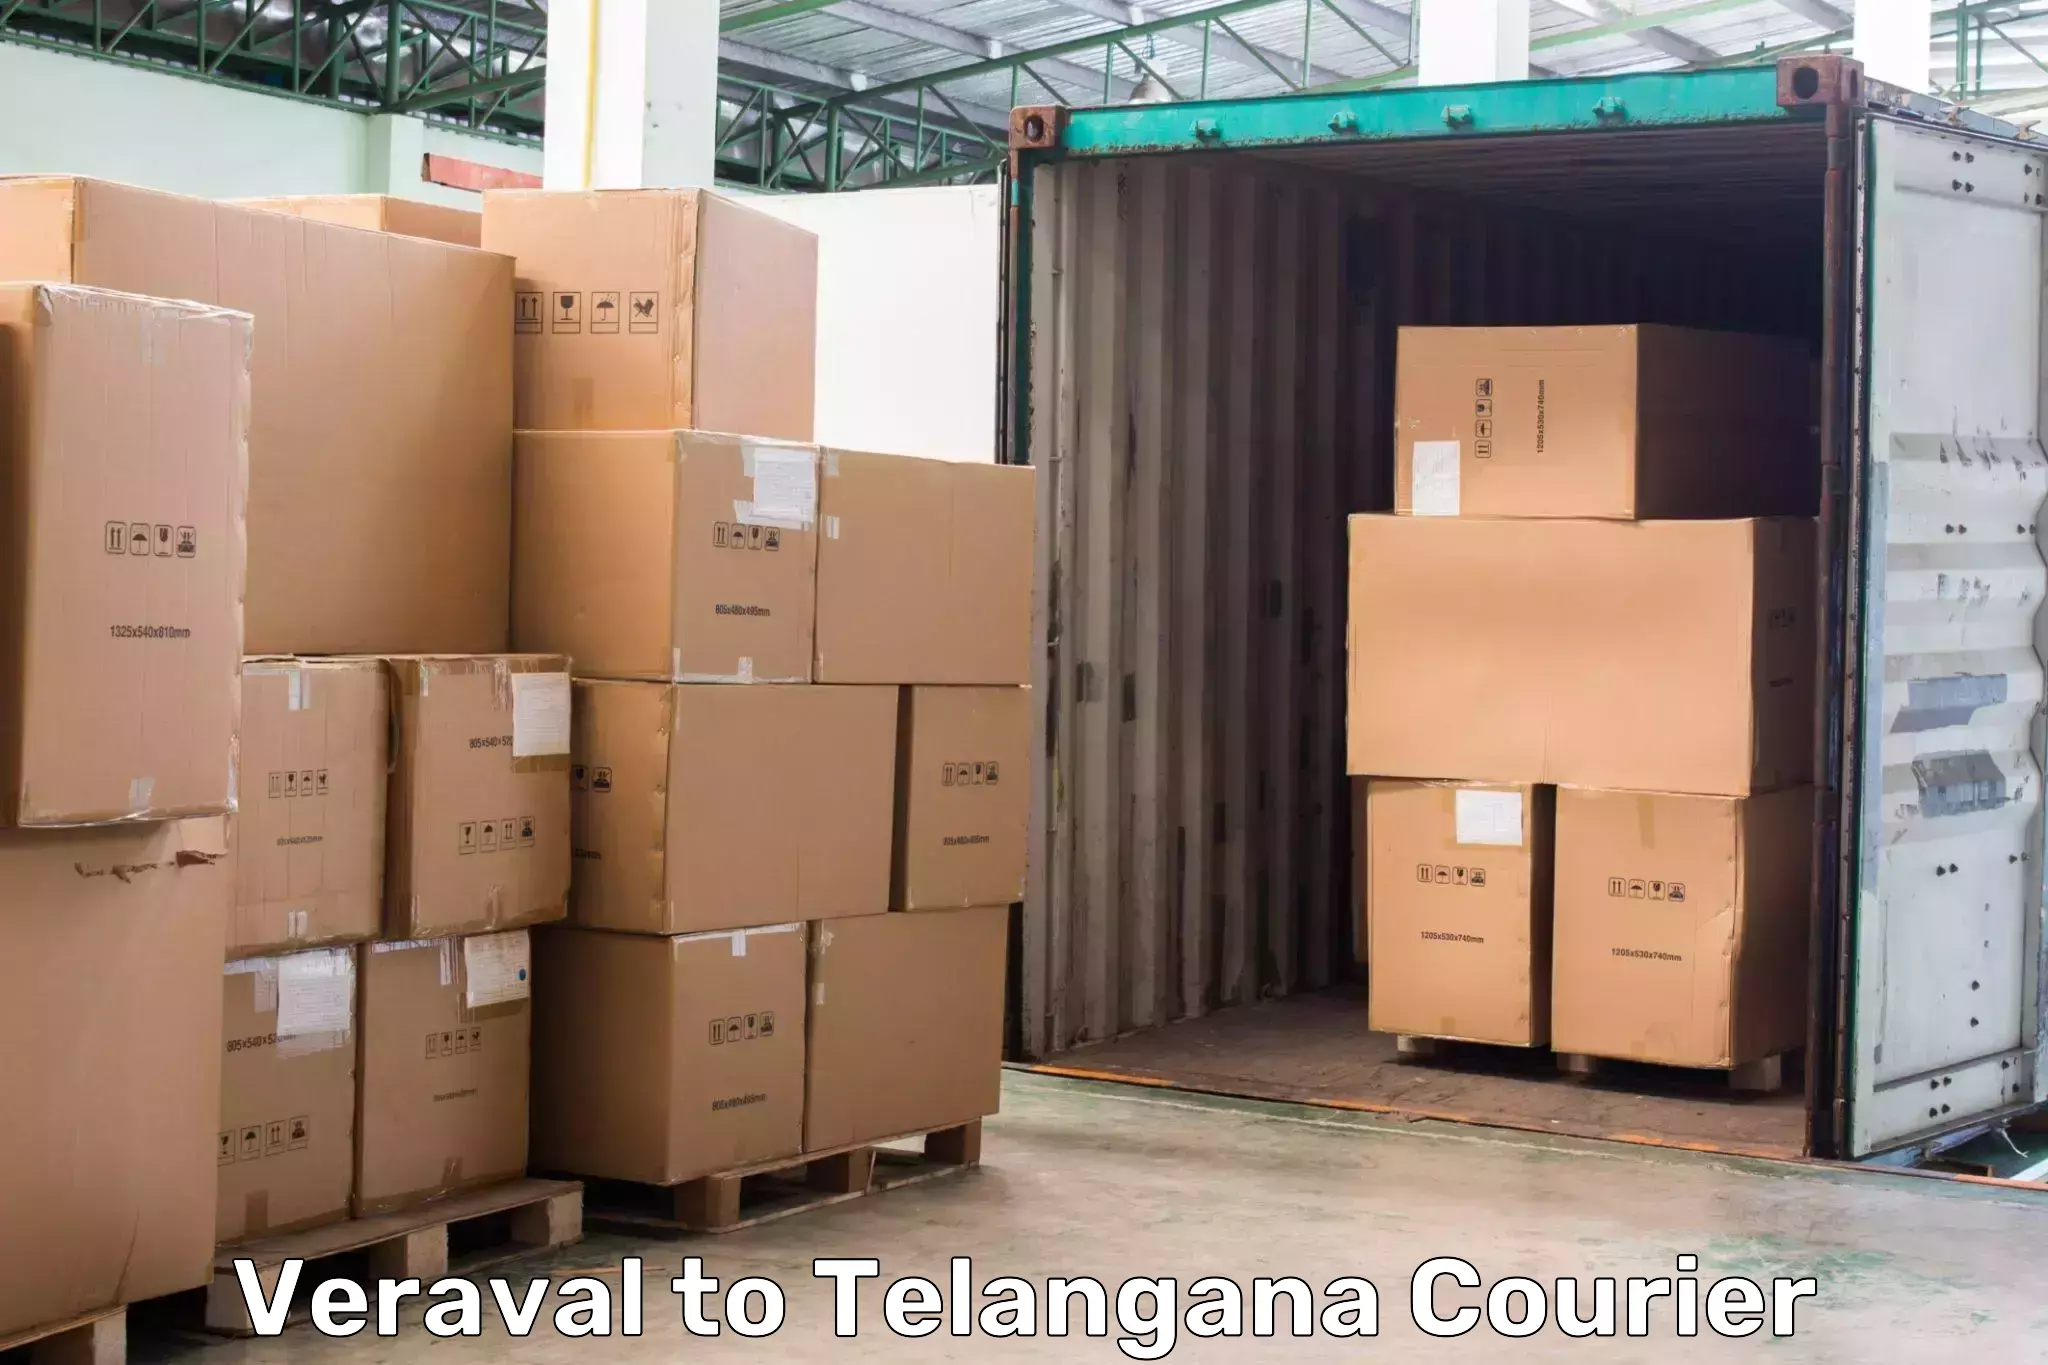 Multi-national courier services Veraval to Manopad